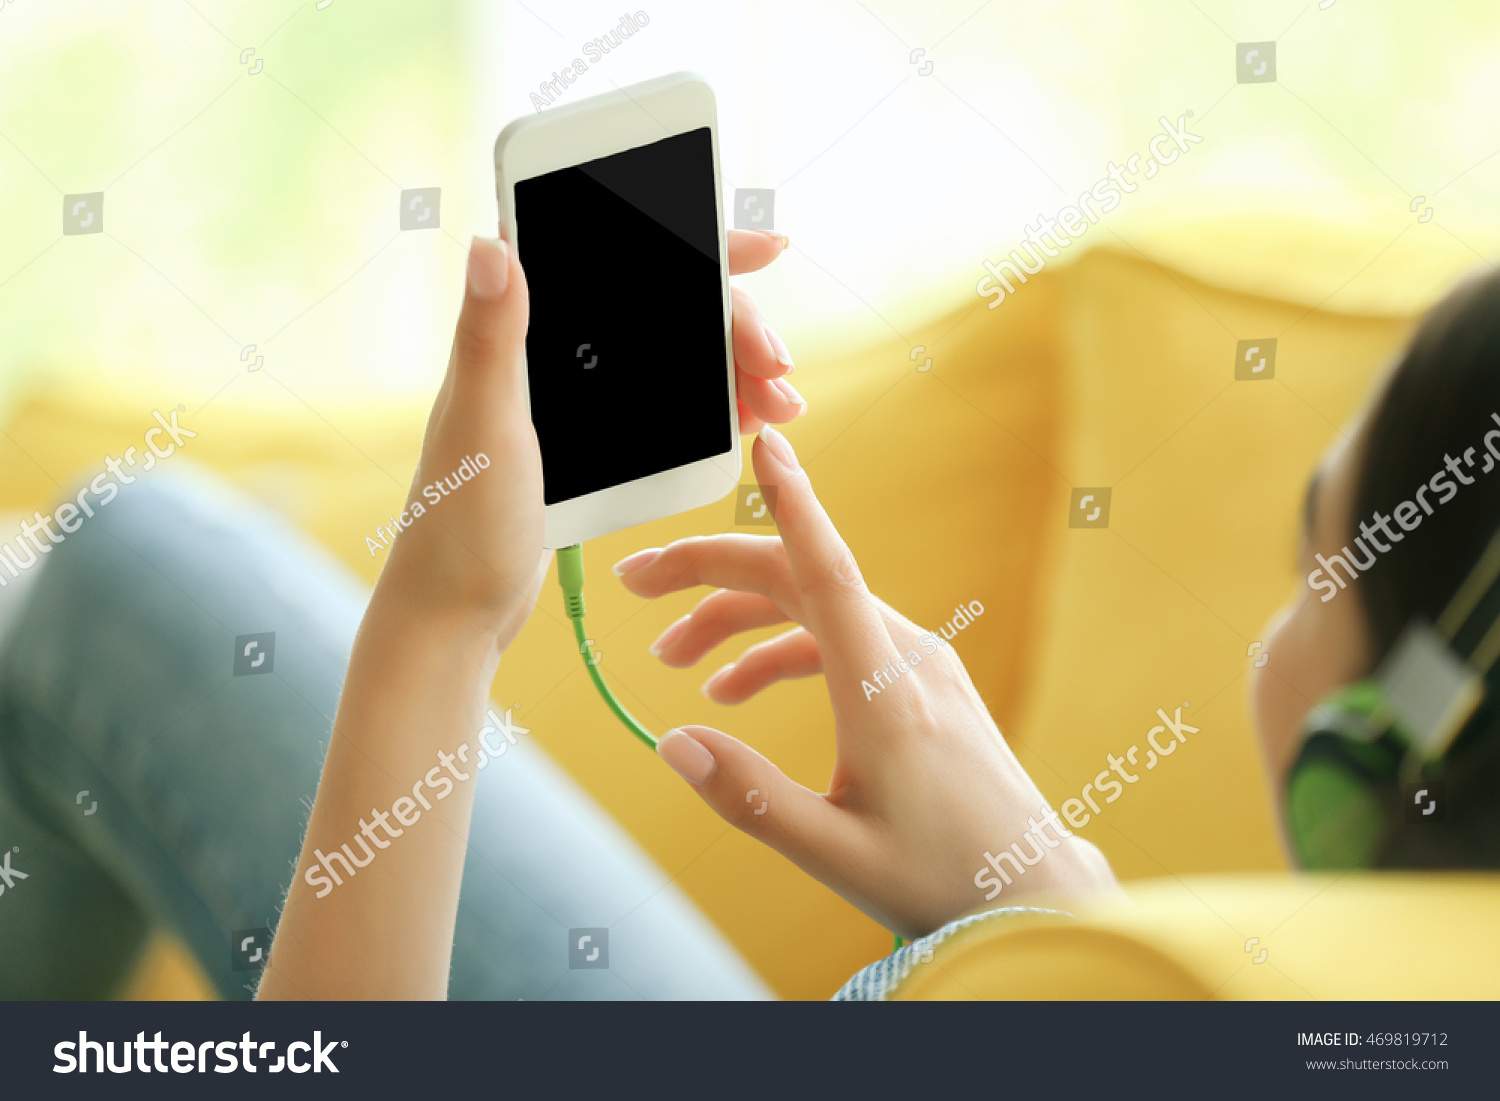 Woman listening to music on smartphone in the room #469819712